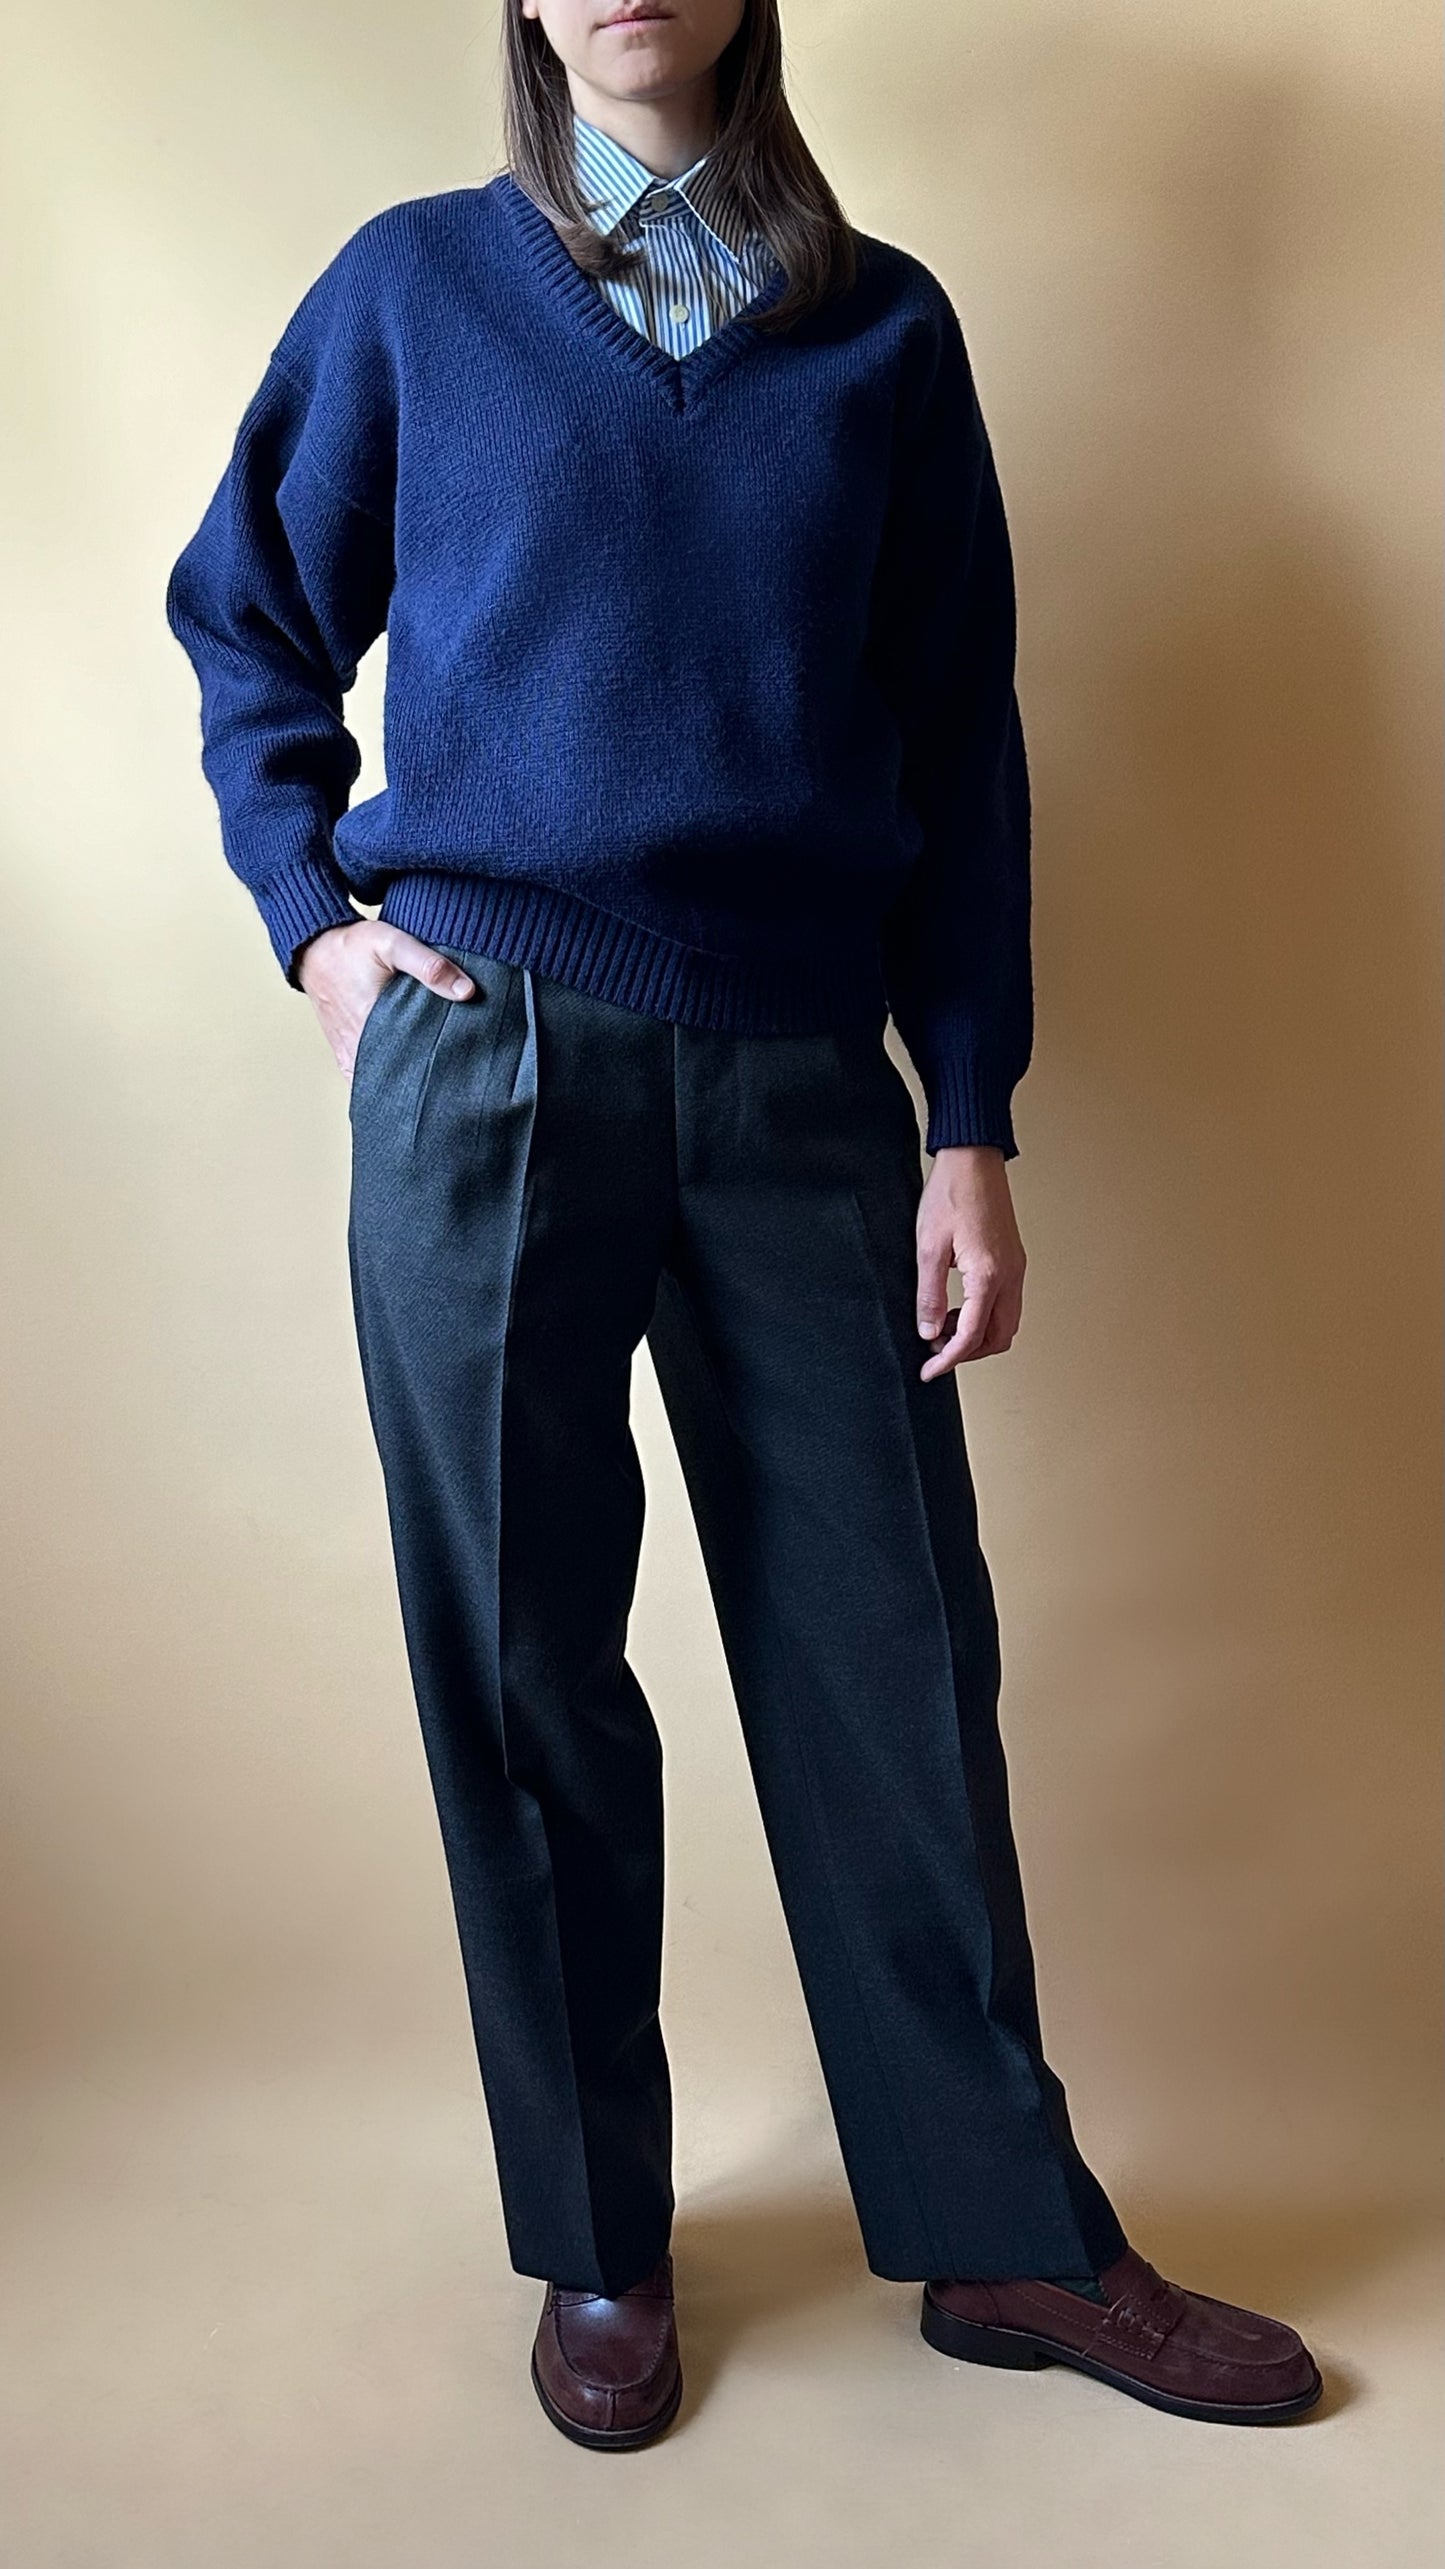 Vintage Gray Trousers